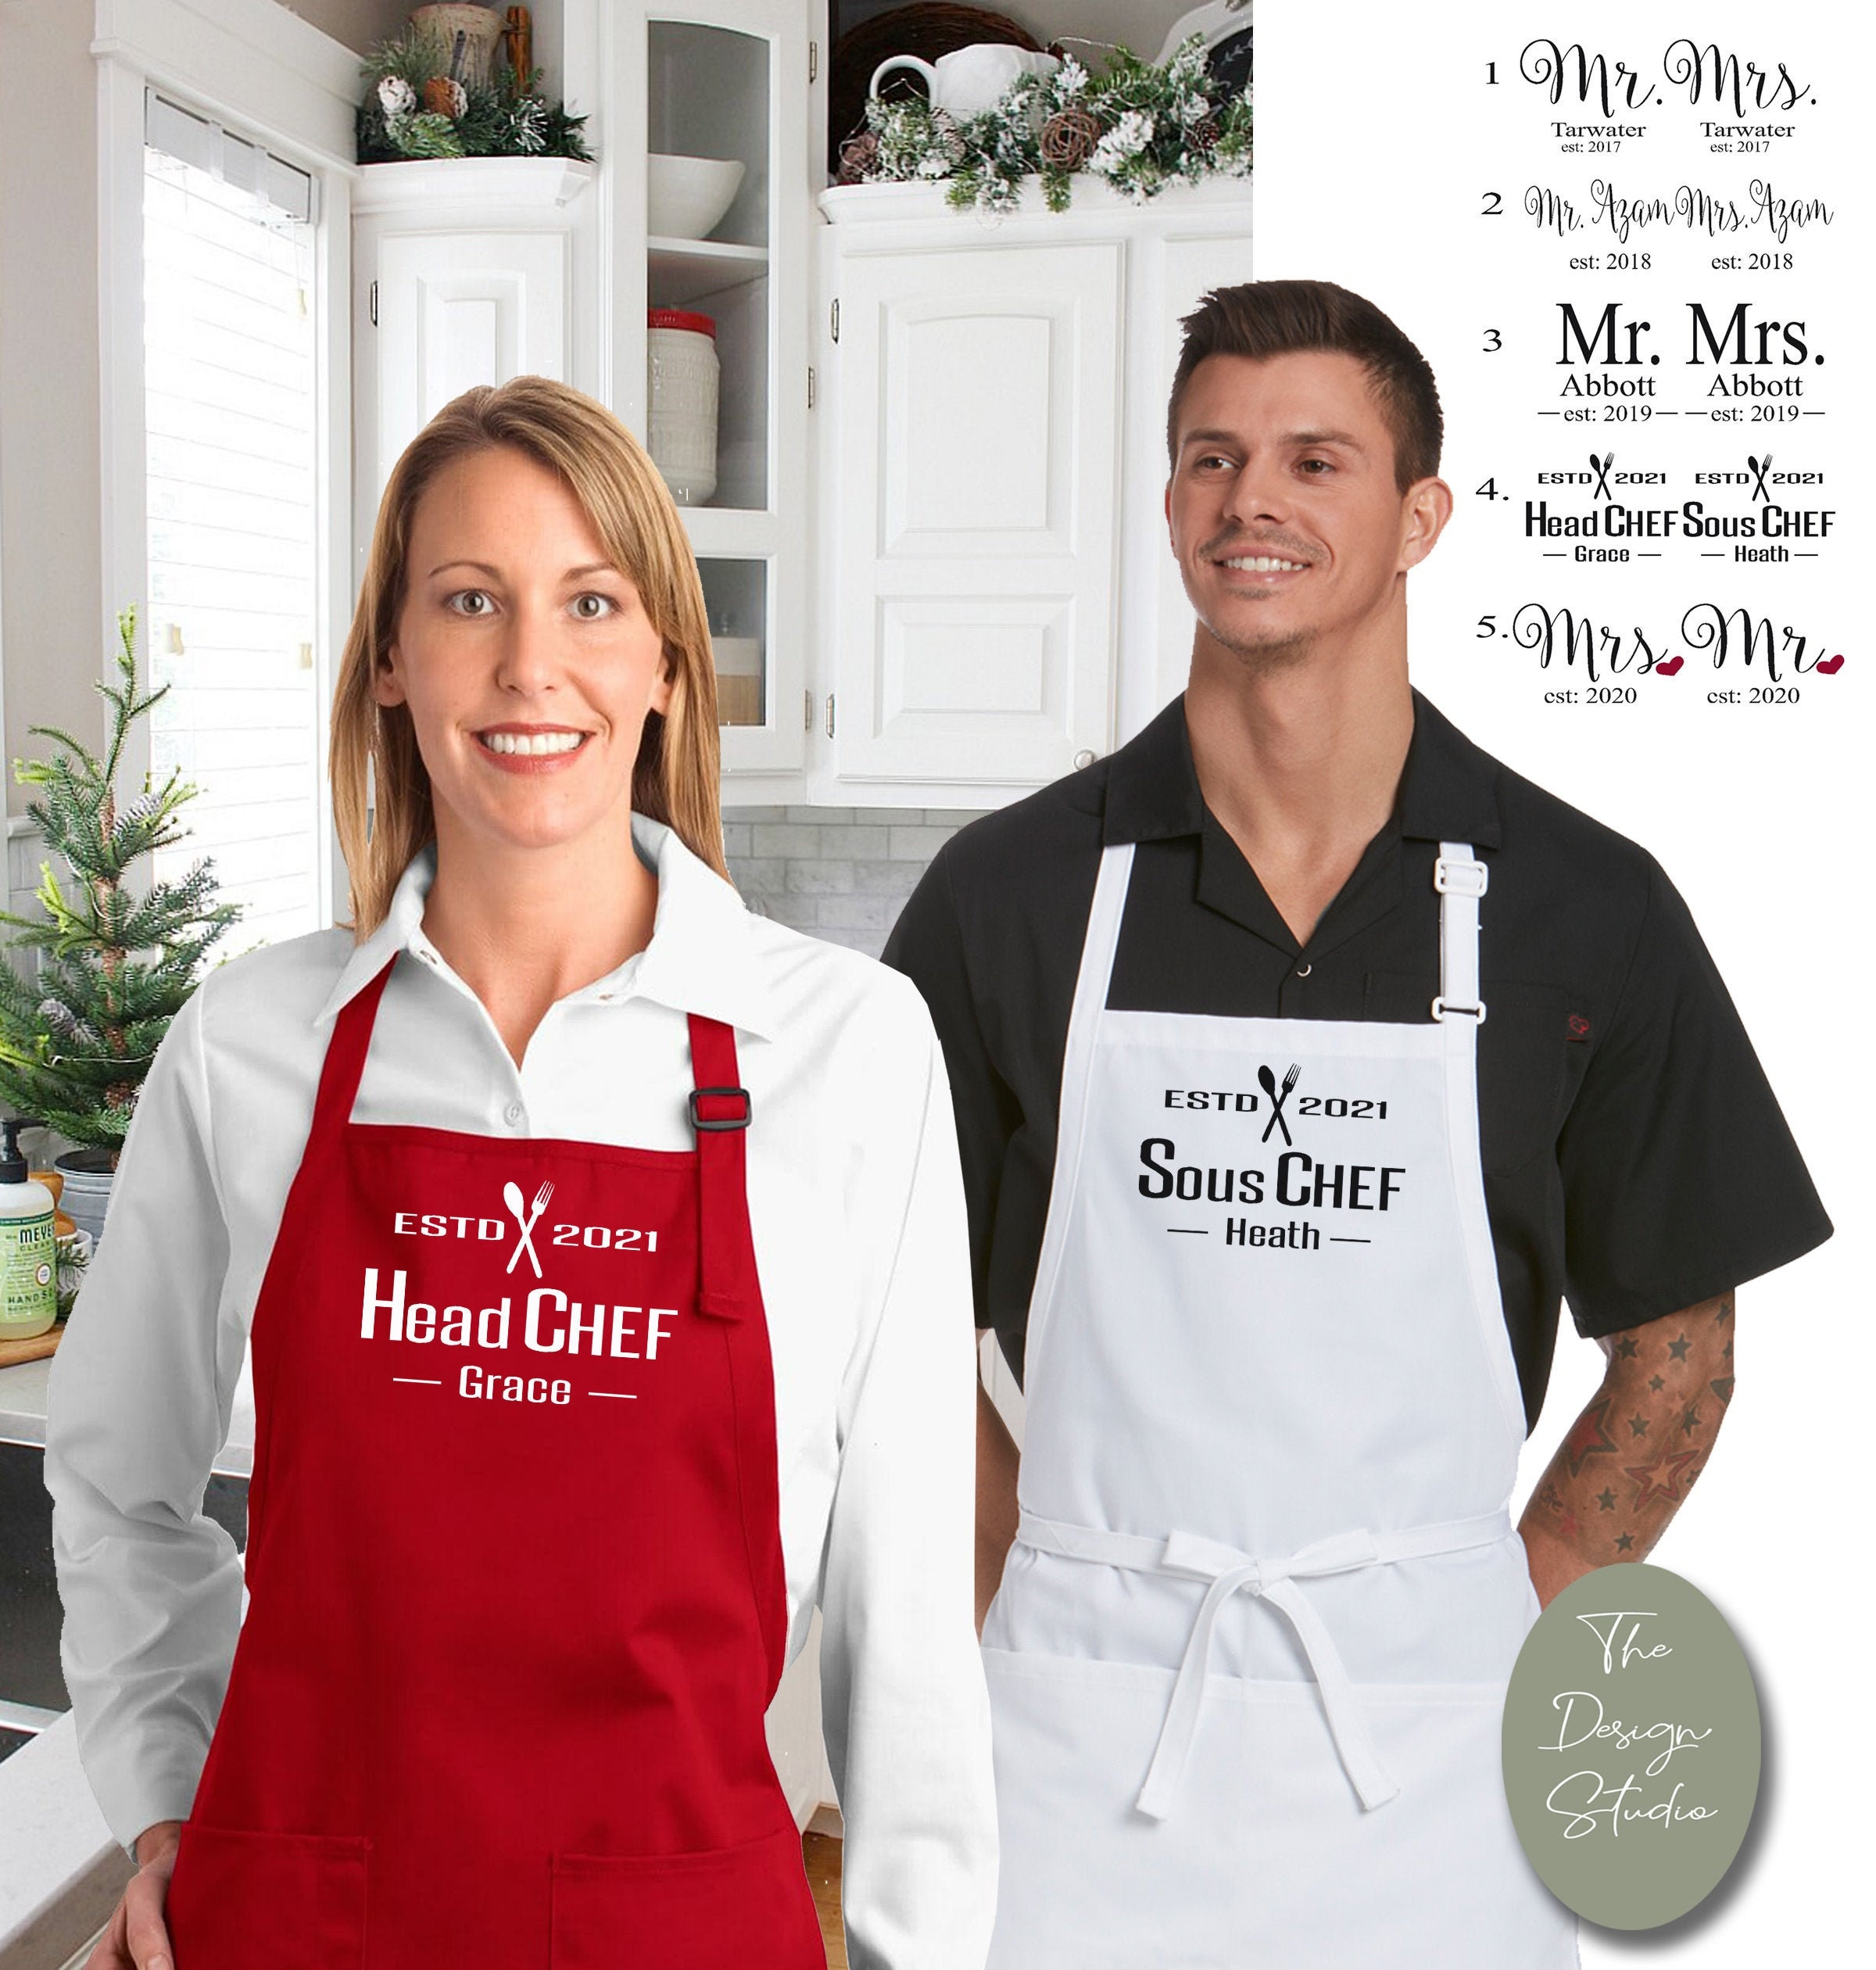 Cinmouter 8pc Kitchen Cooking Apron Gift Set，Wedding Gifts Engagement Gifts  For Couples Mr And Mrs Aprons For Couples Gifts